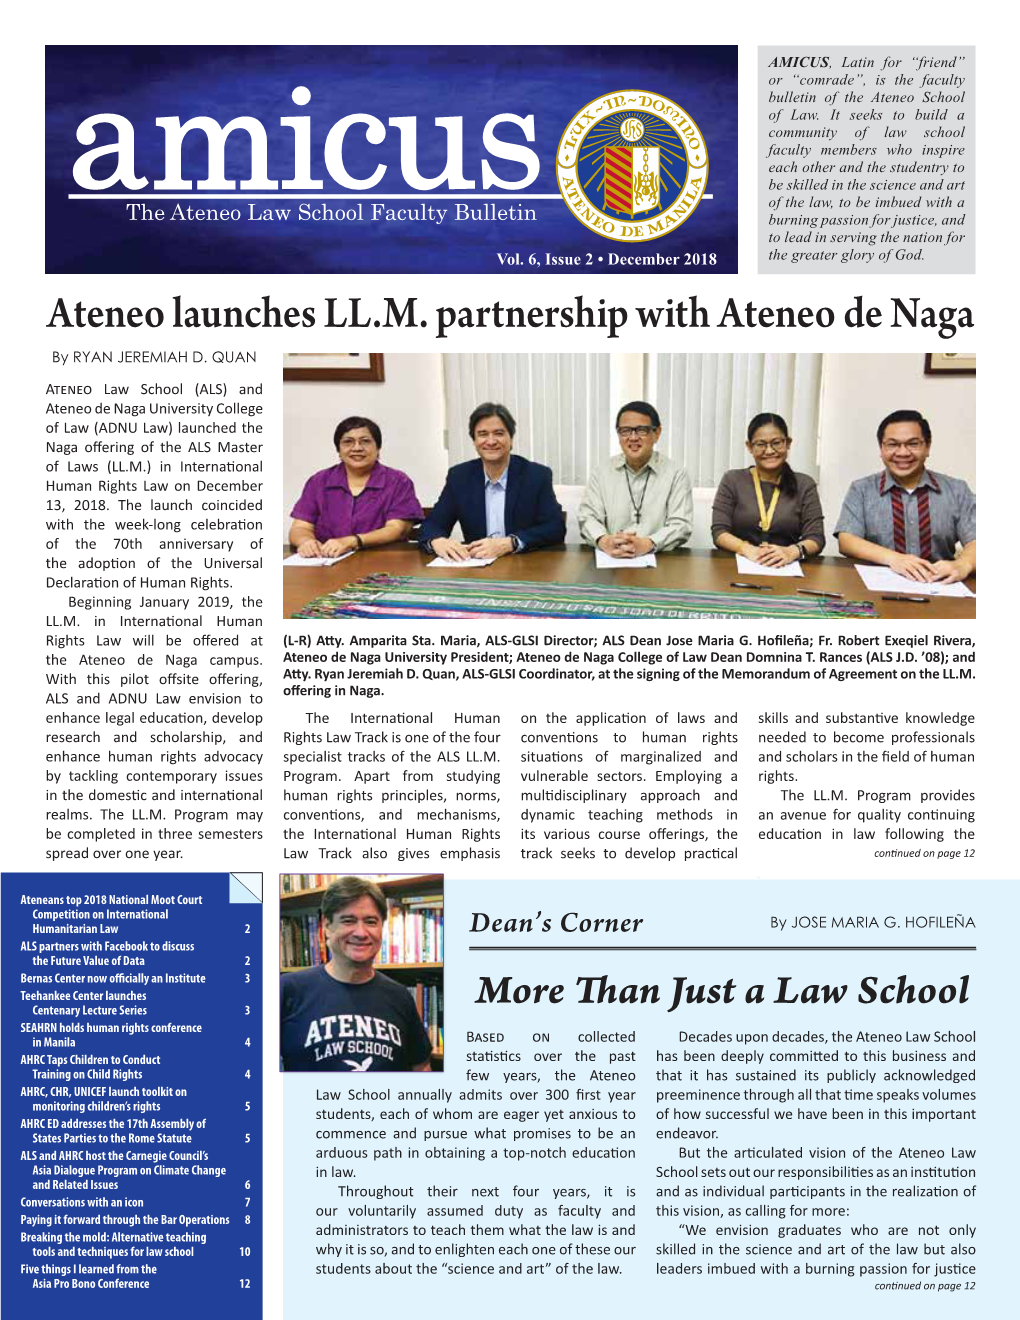 Ateneo Launches LL.M. Partnership with Ateneo De Naga by RYAN JEREMIAH D